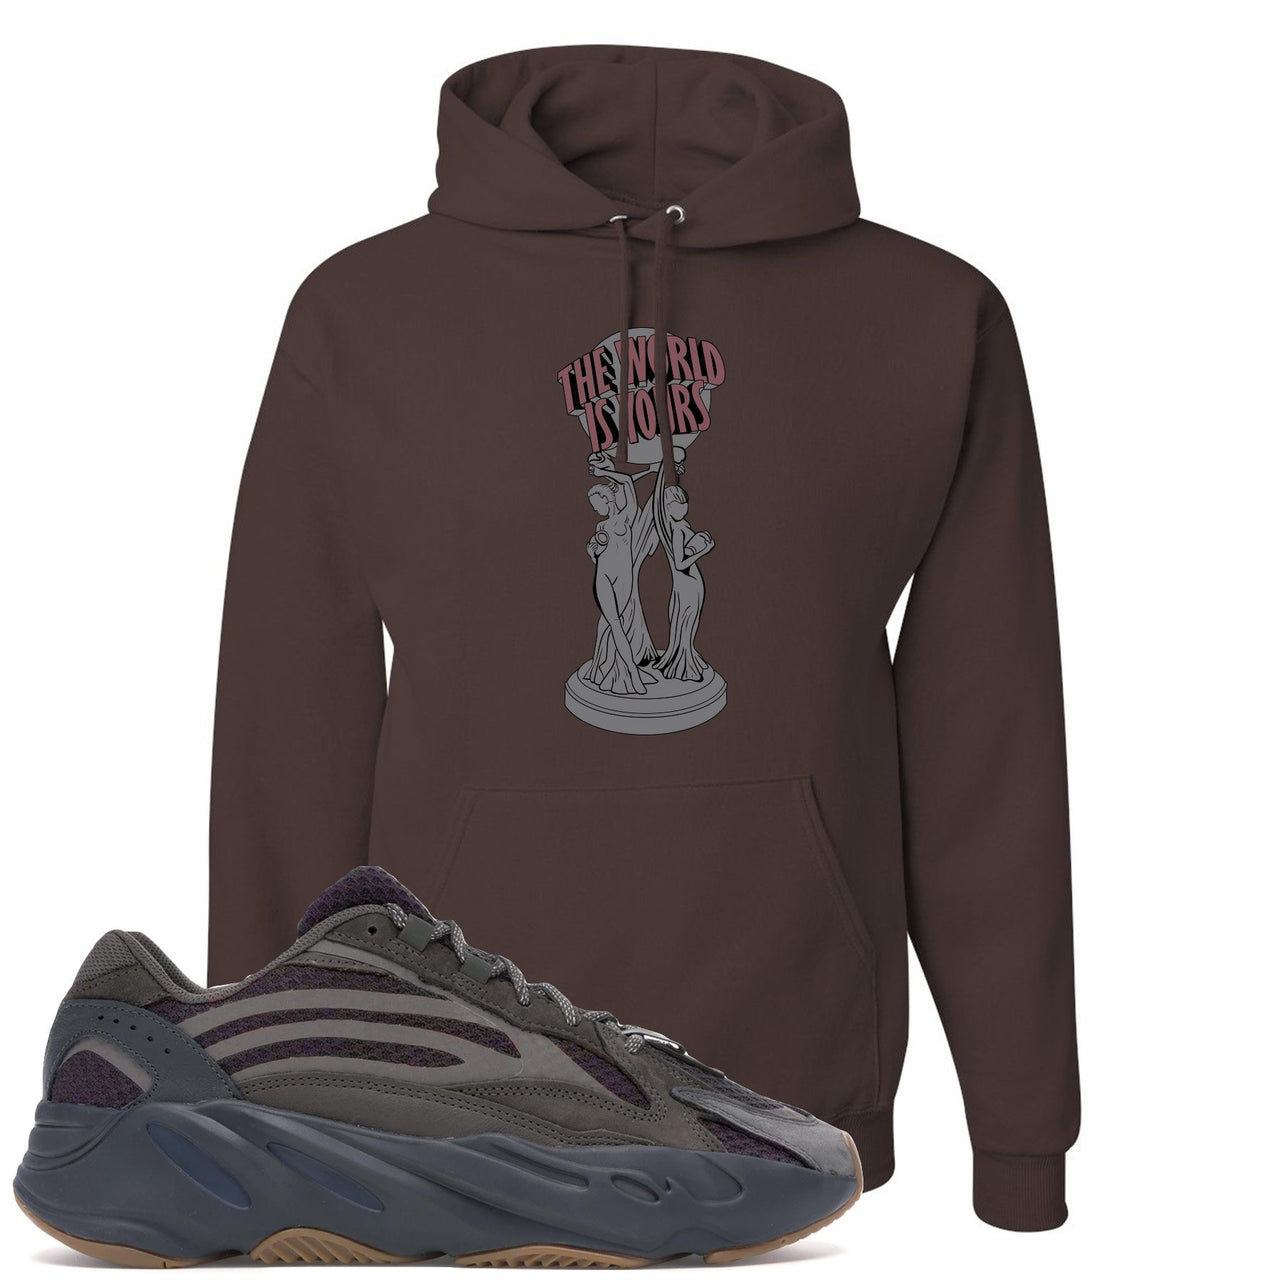 Geode 700s Hoodie | The World Is Yours, Brown